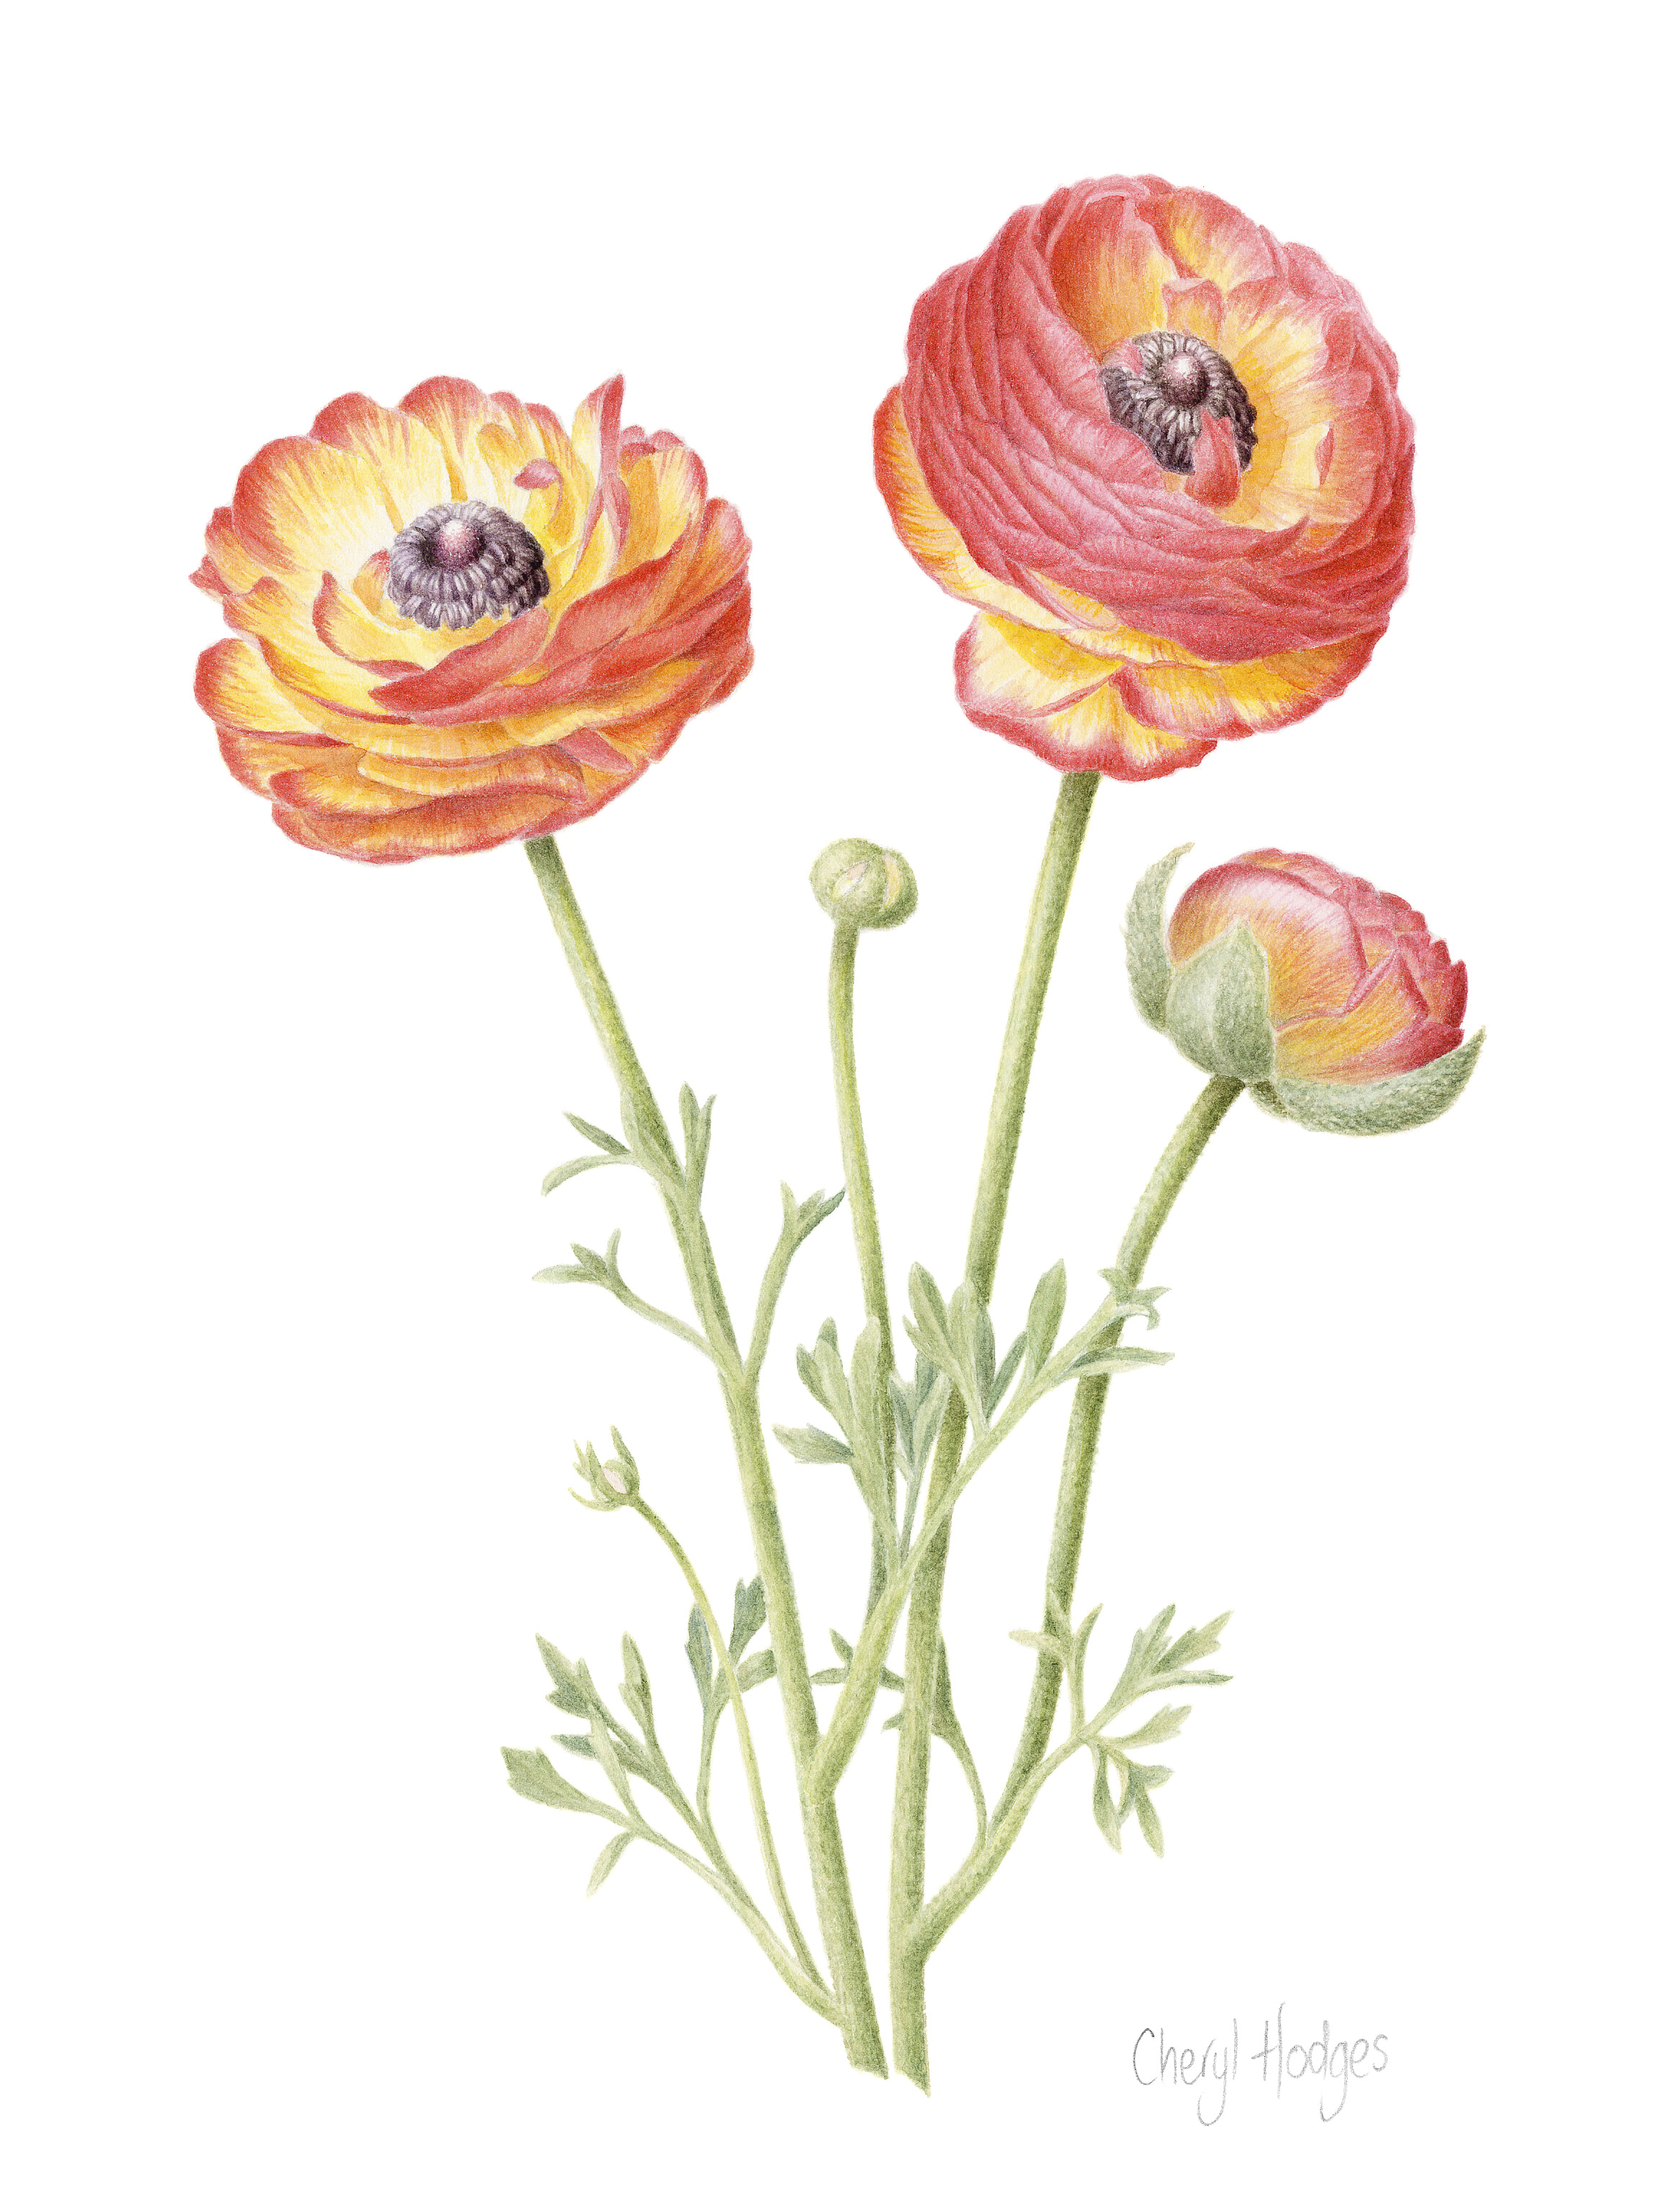 Limited edition Giclee print of Horrie's Ranunculus